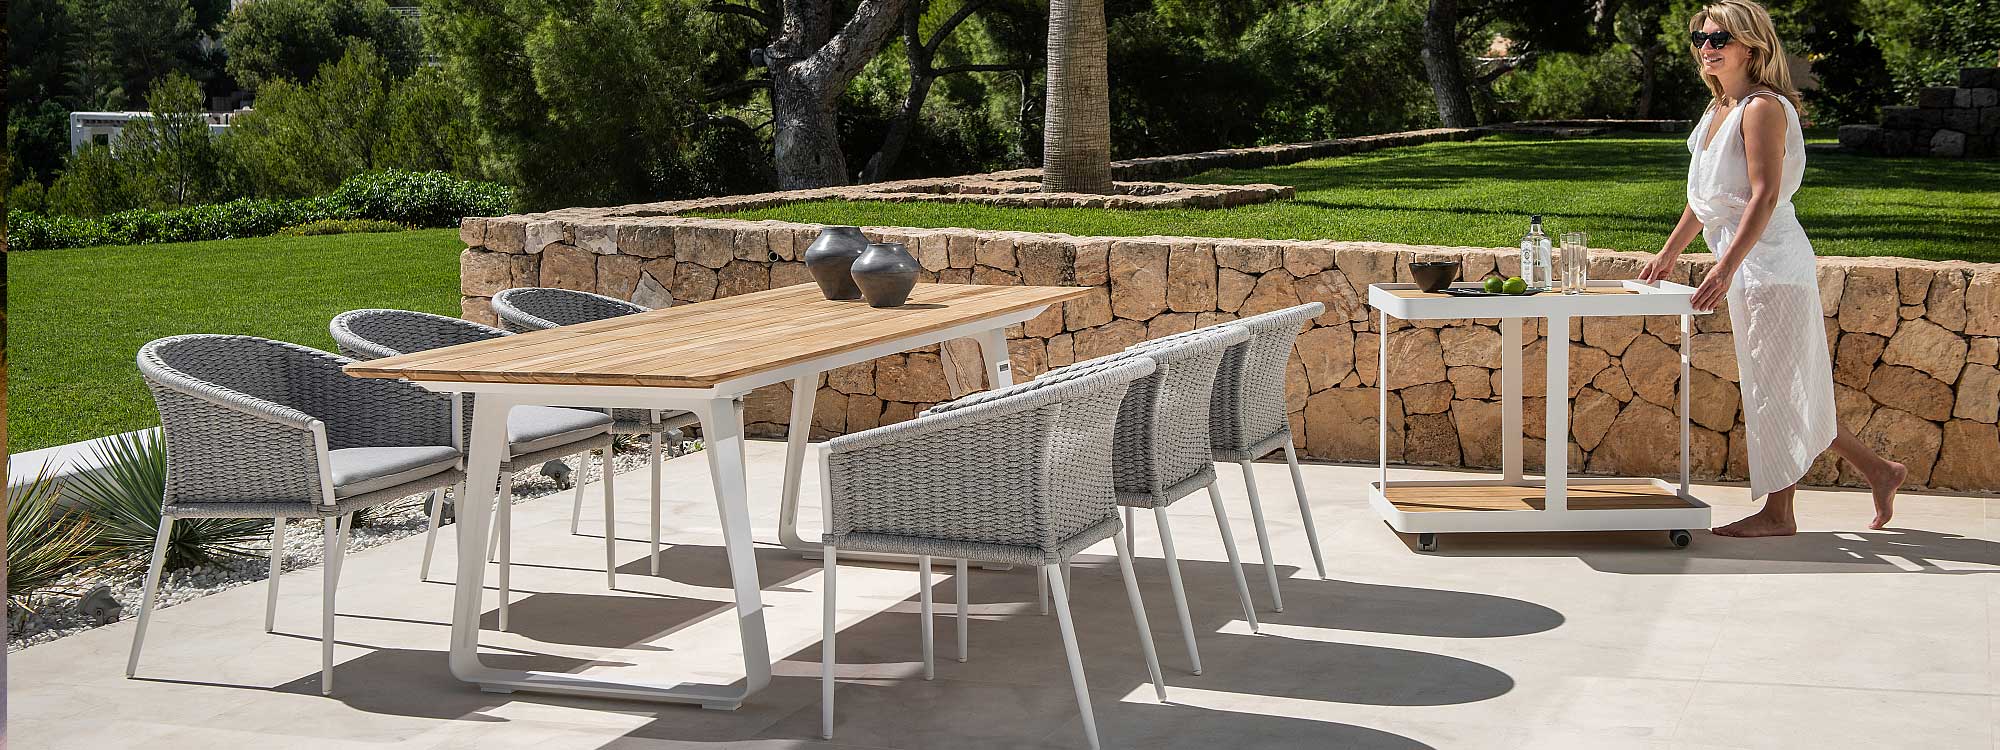 Image of sunny terrace with Fortuna Rope white-grey garden chairs and Elko white table with teak table top by Jati & Kebon